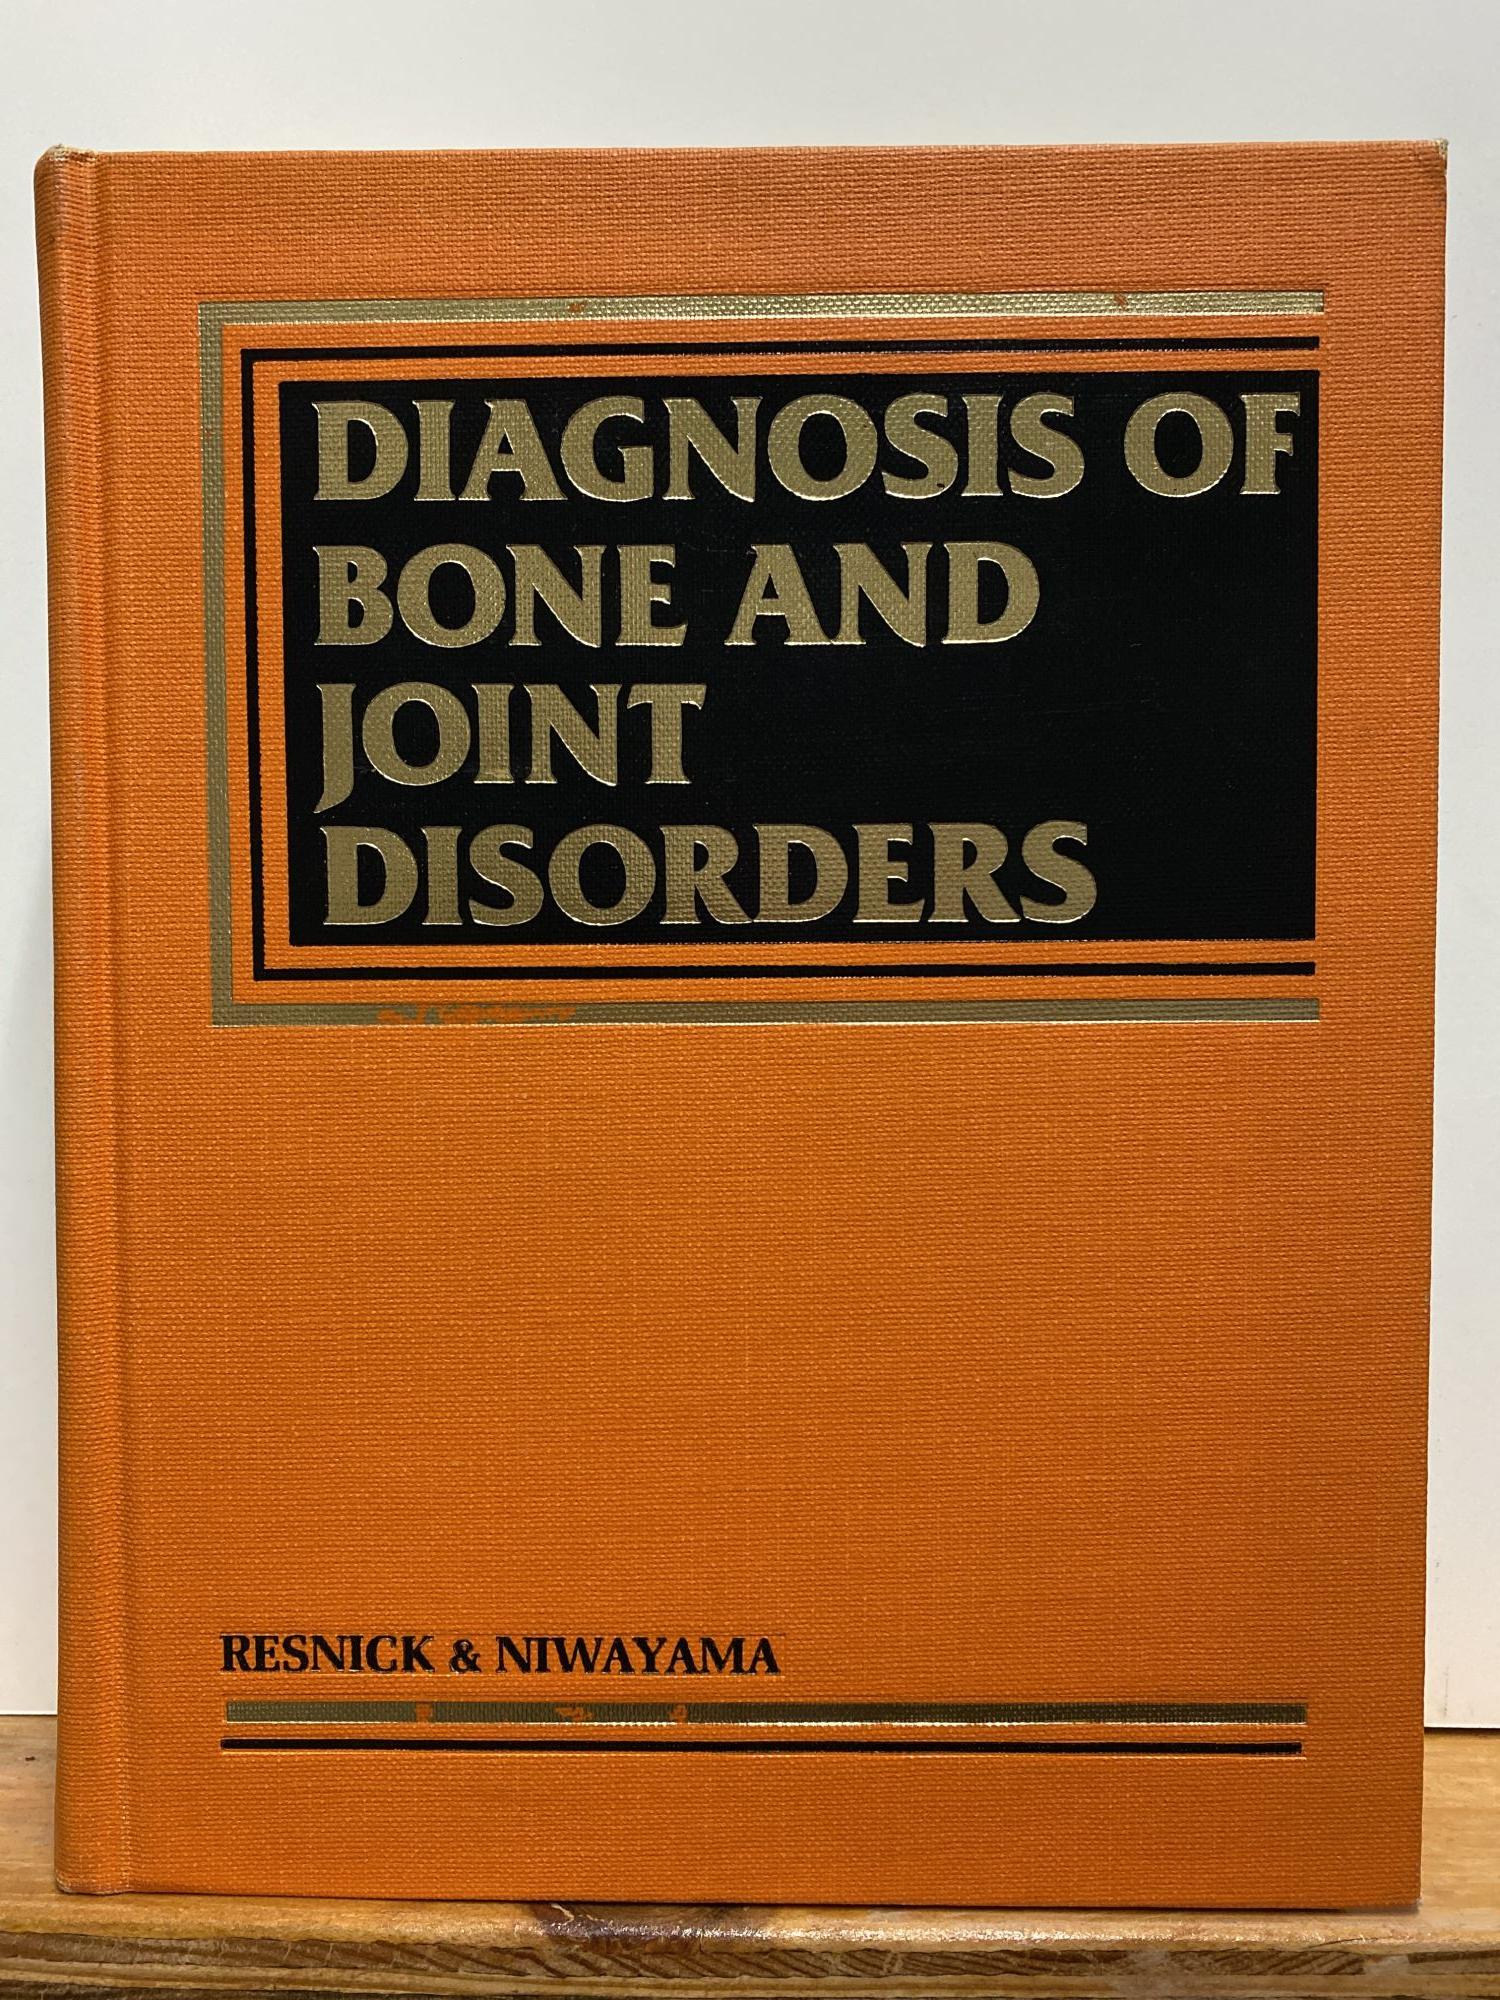 diagnosis of Bone and Joint Disorders